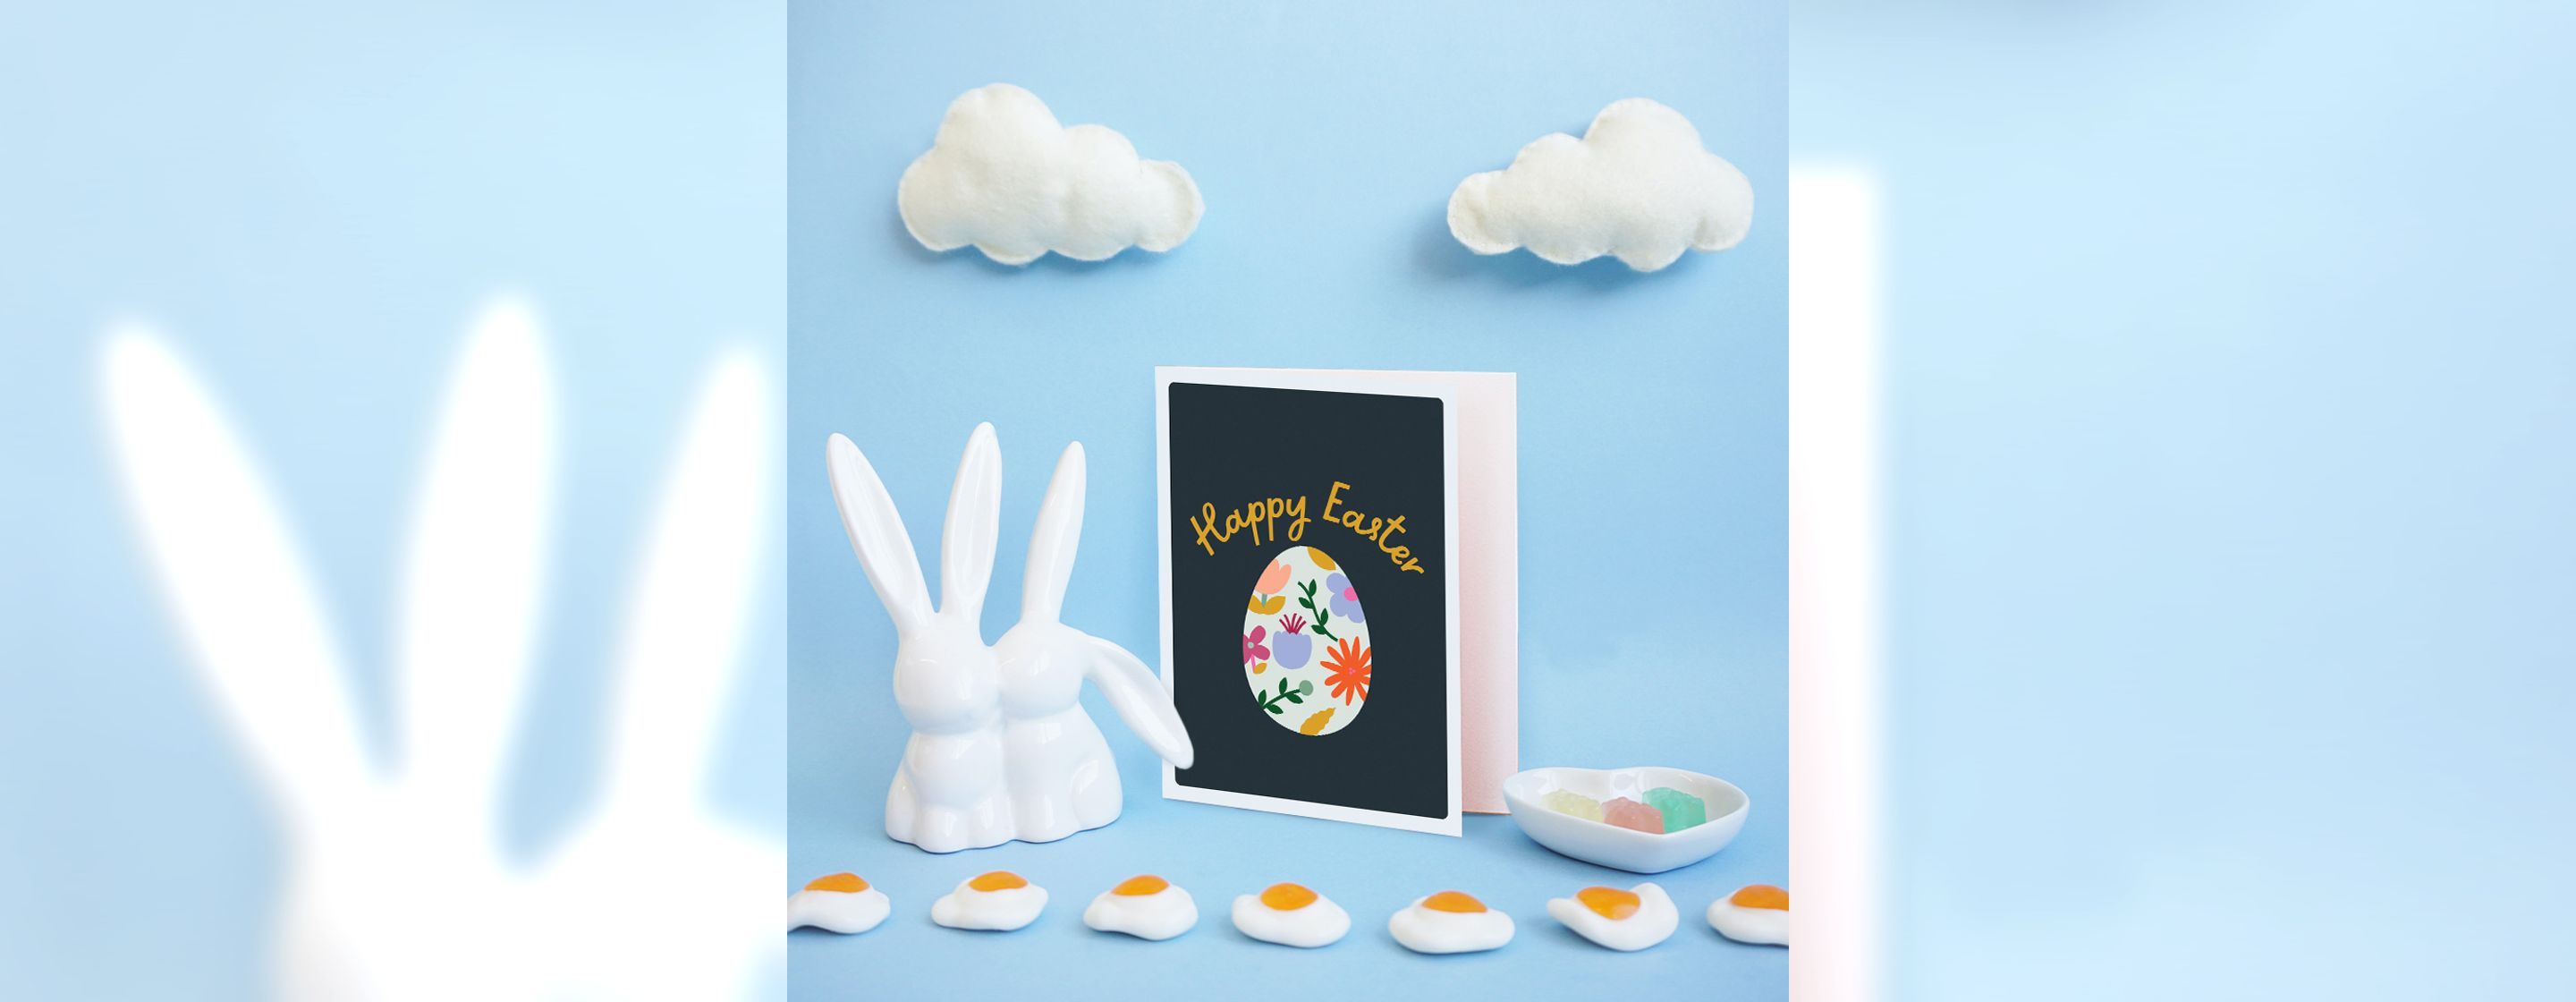 Egg-cellent messages: What to write in an Easter card